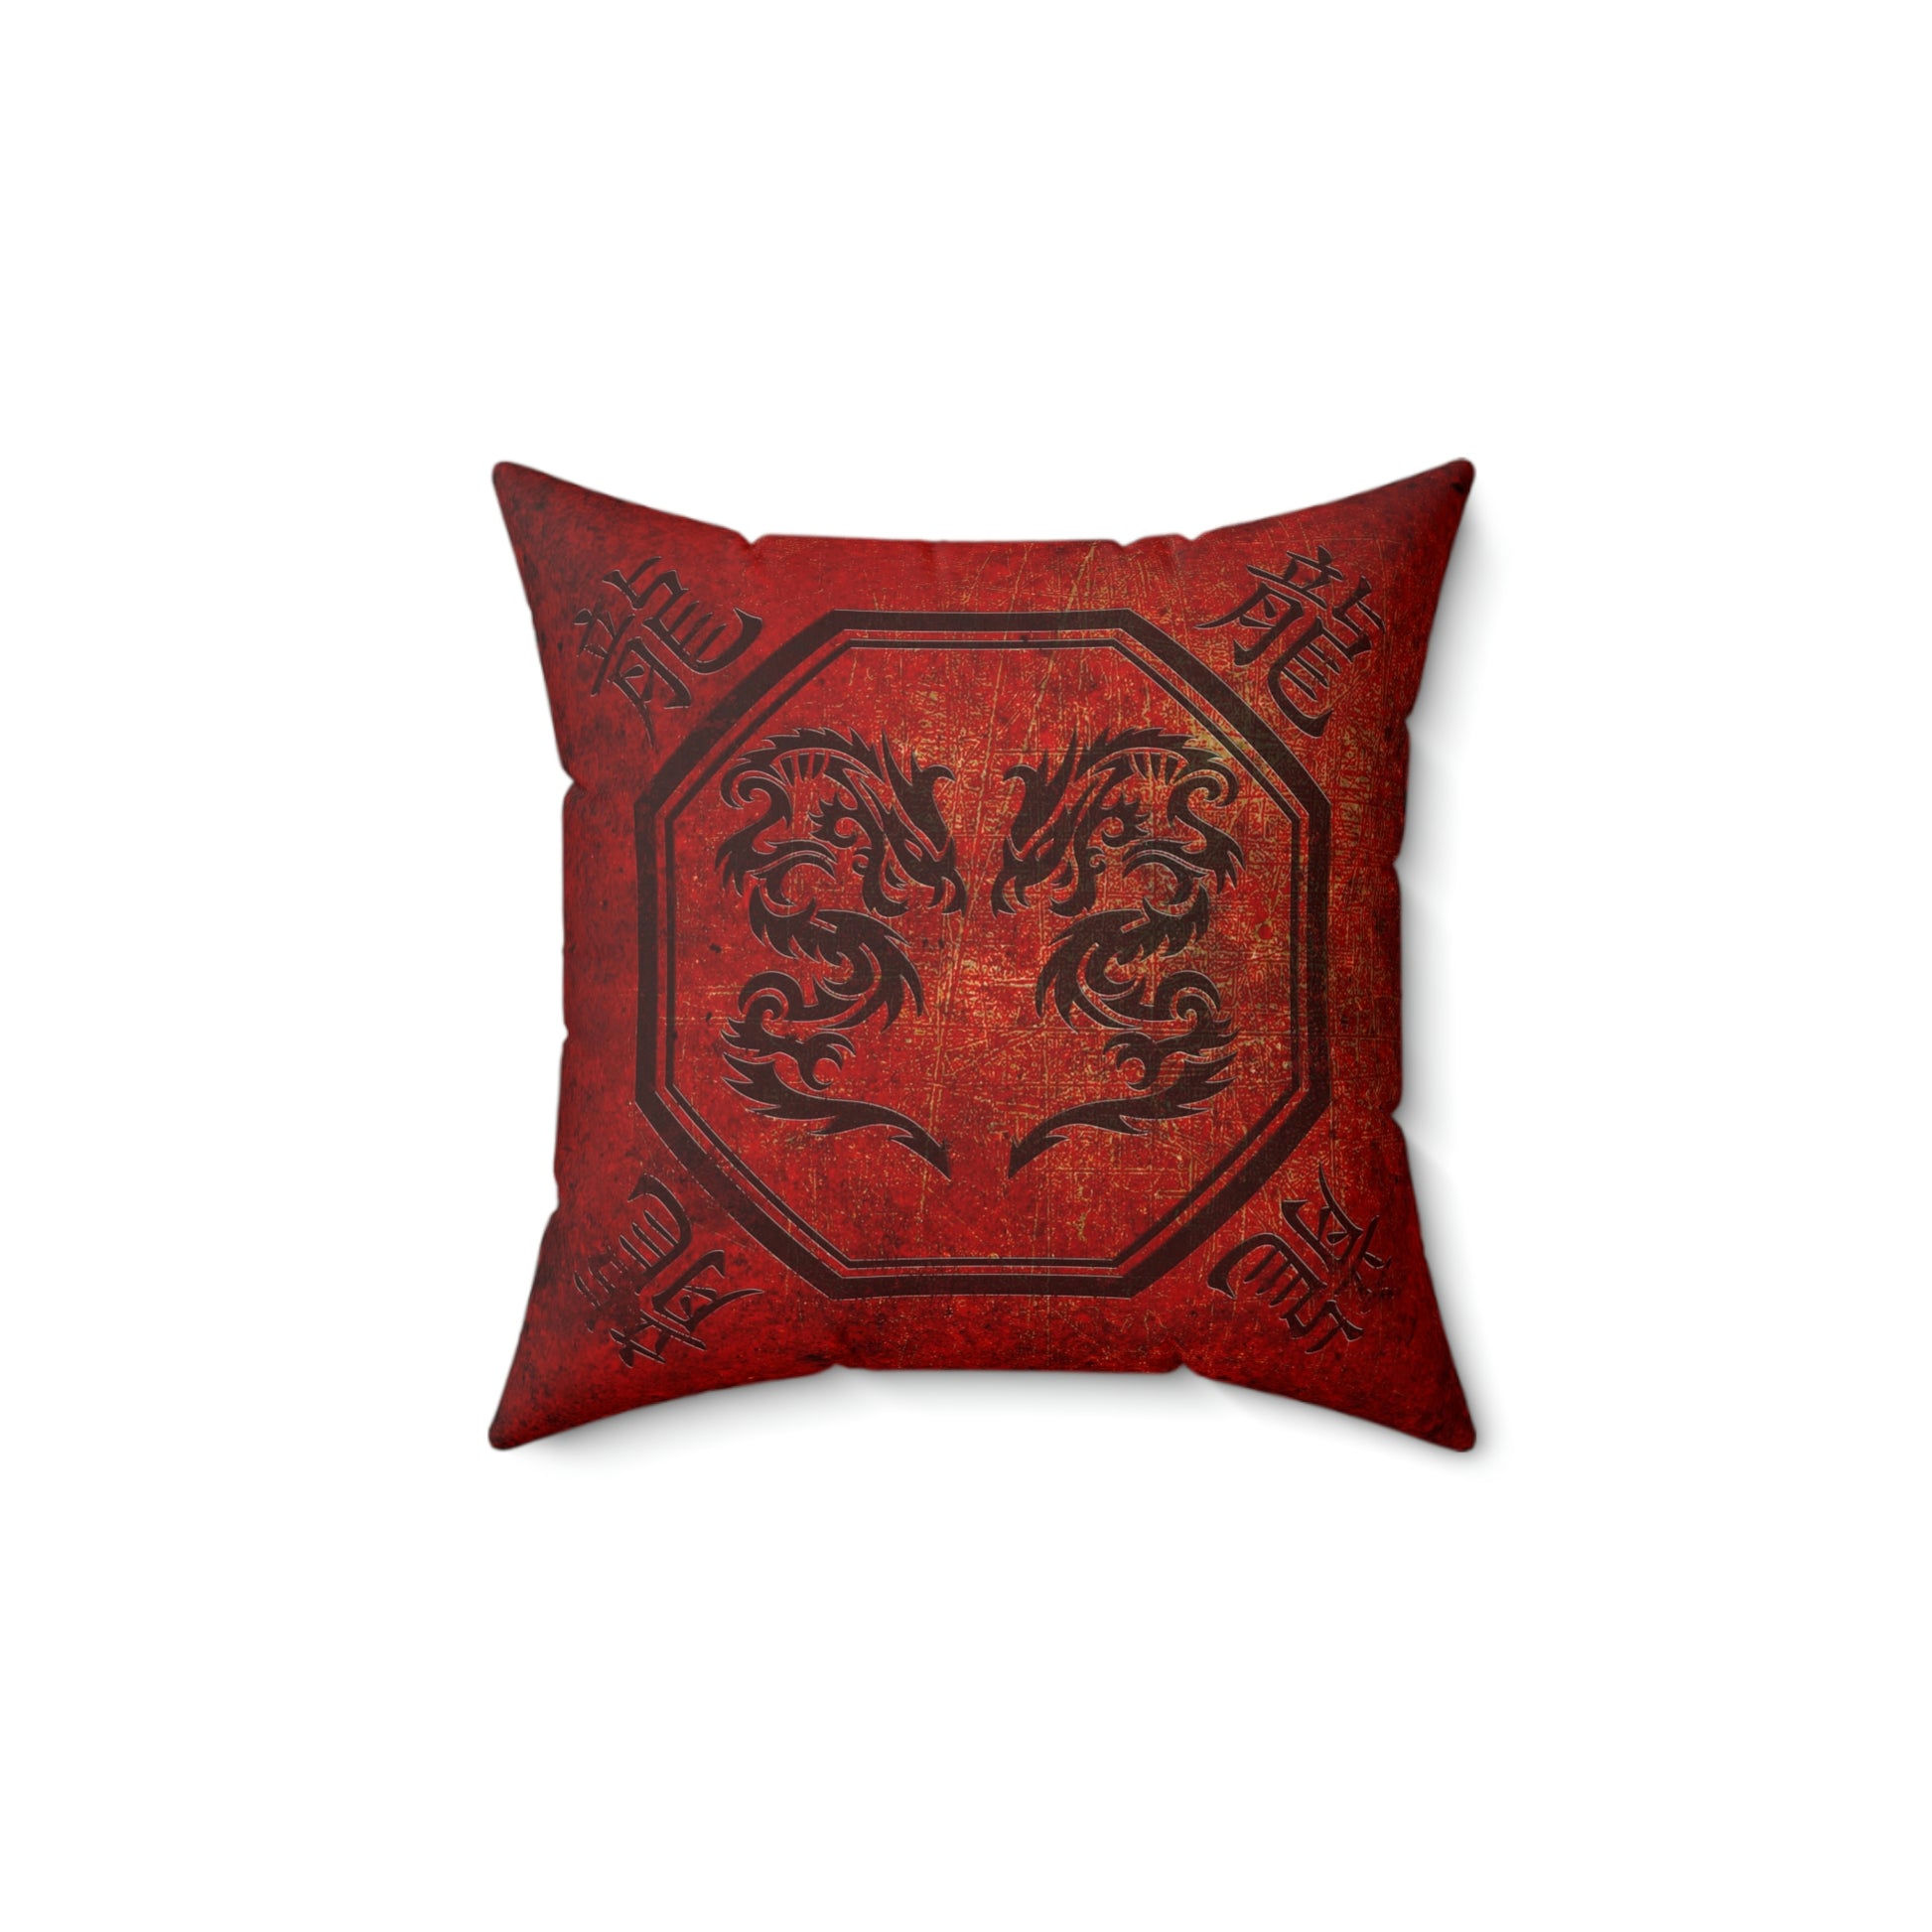 Twin Chinese Dragons on Lava Red Background  Square Pillow 4 sizes available